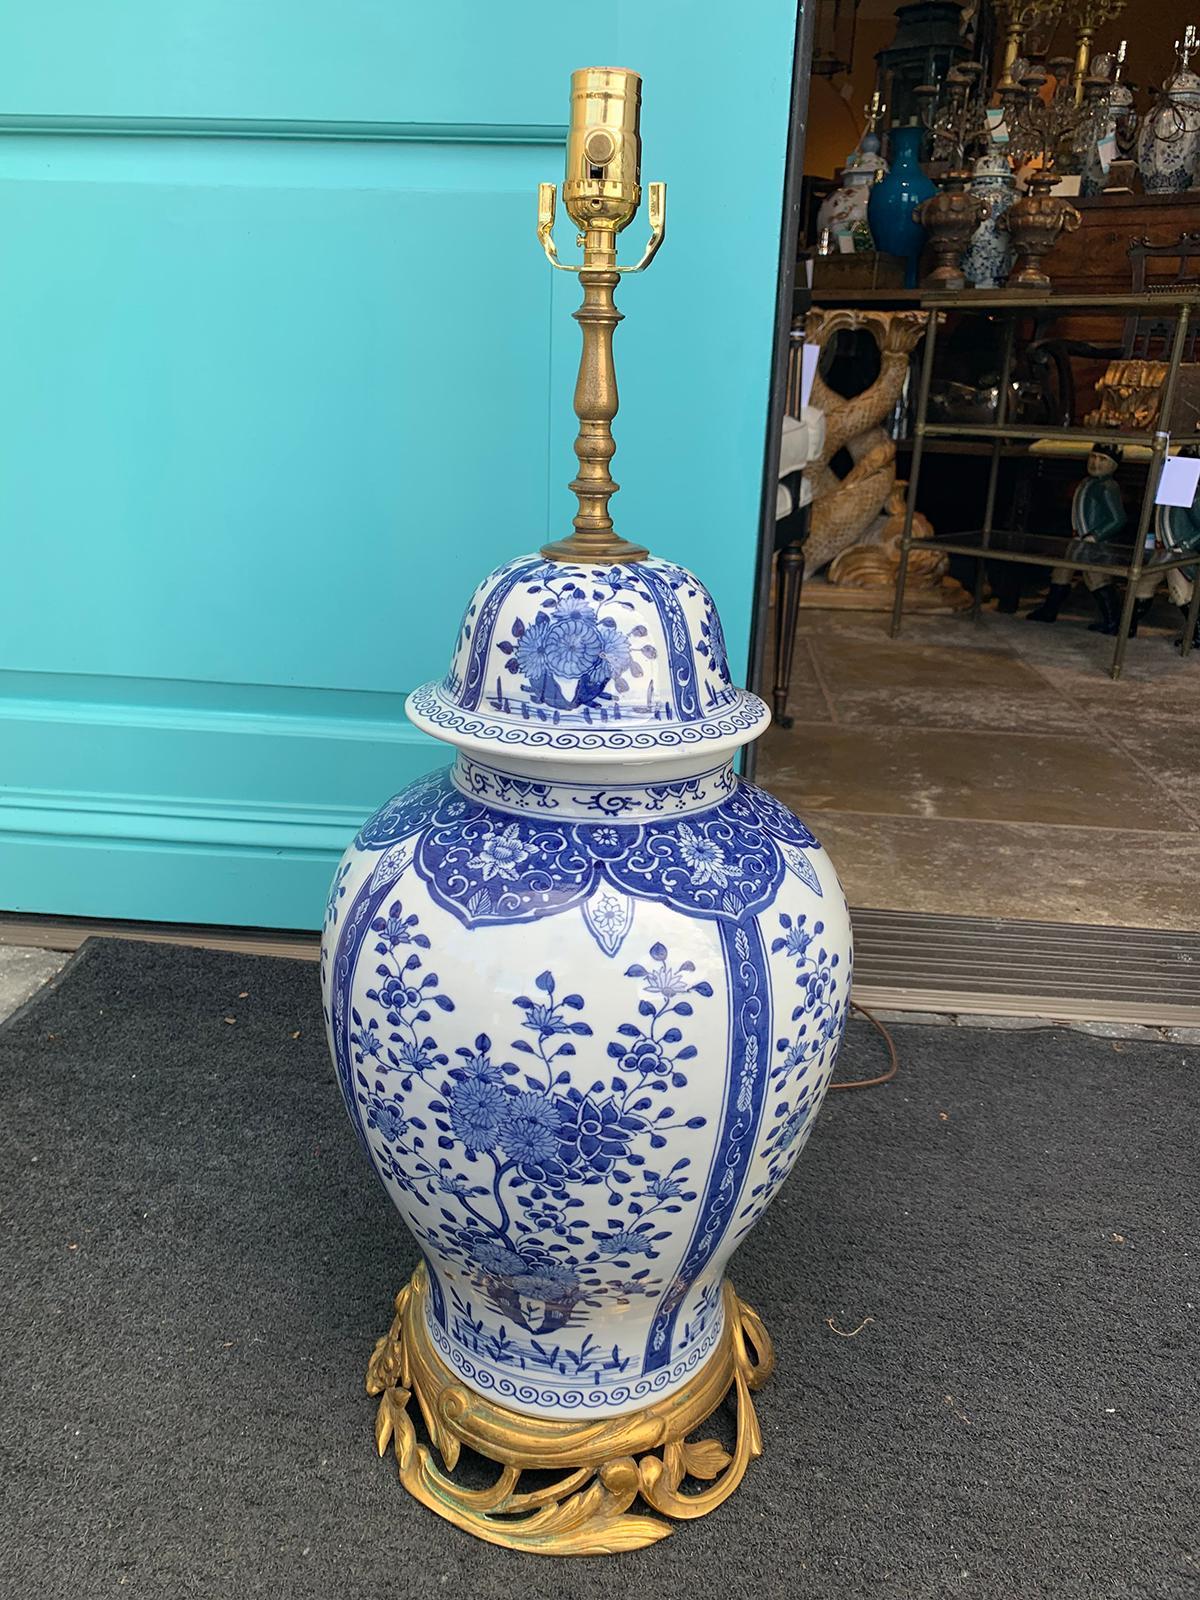 20th century Chinese delft style blue and white bronze mounted lamp.
Brand new wiring.